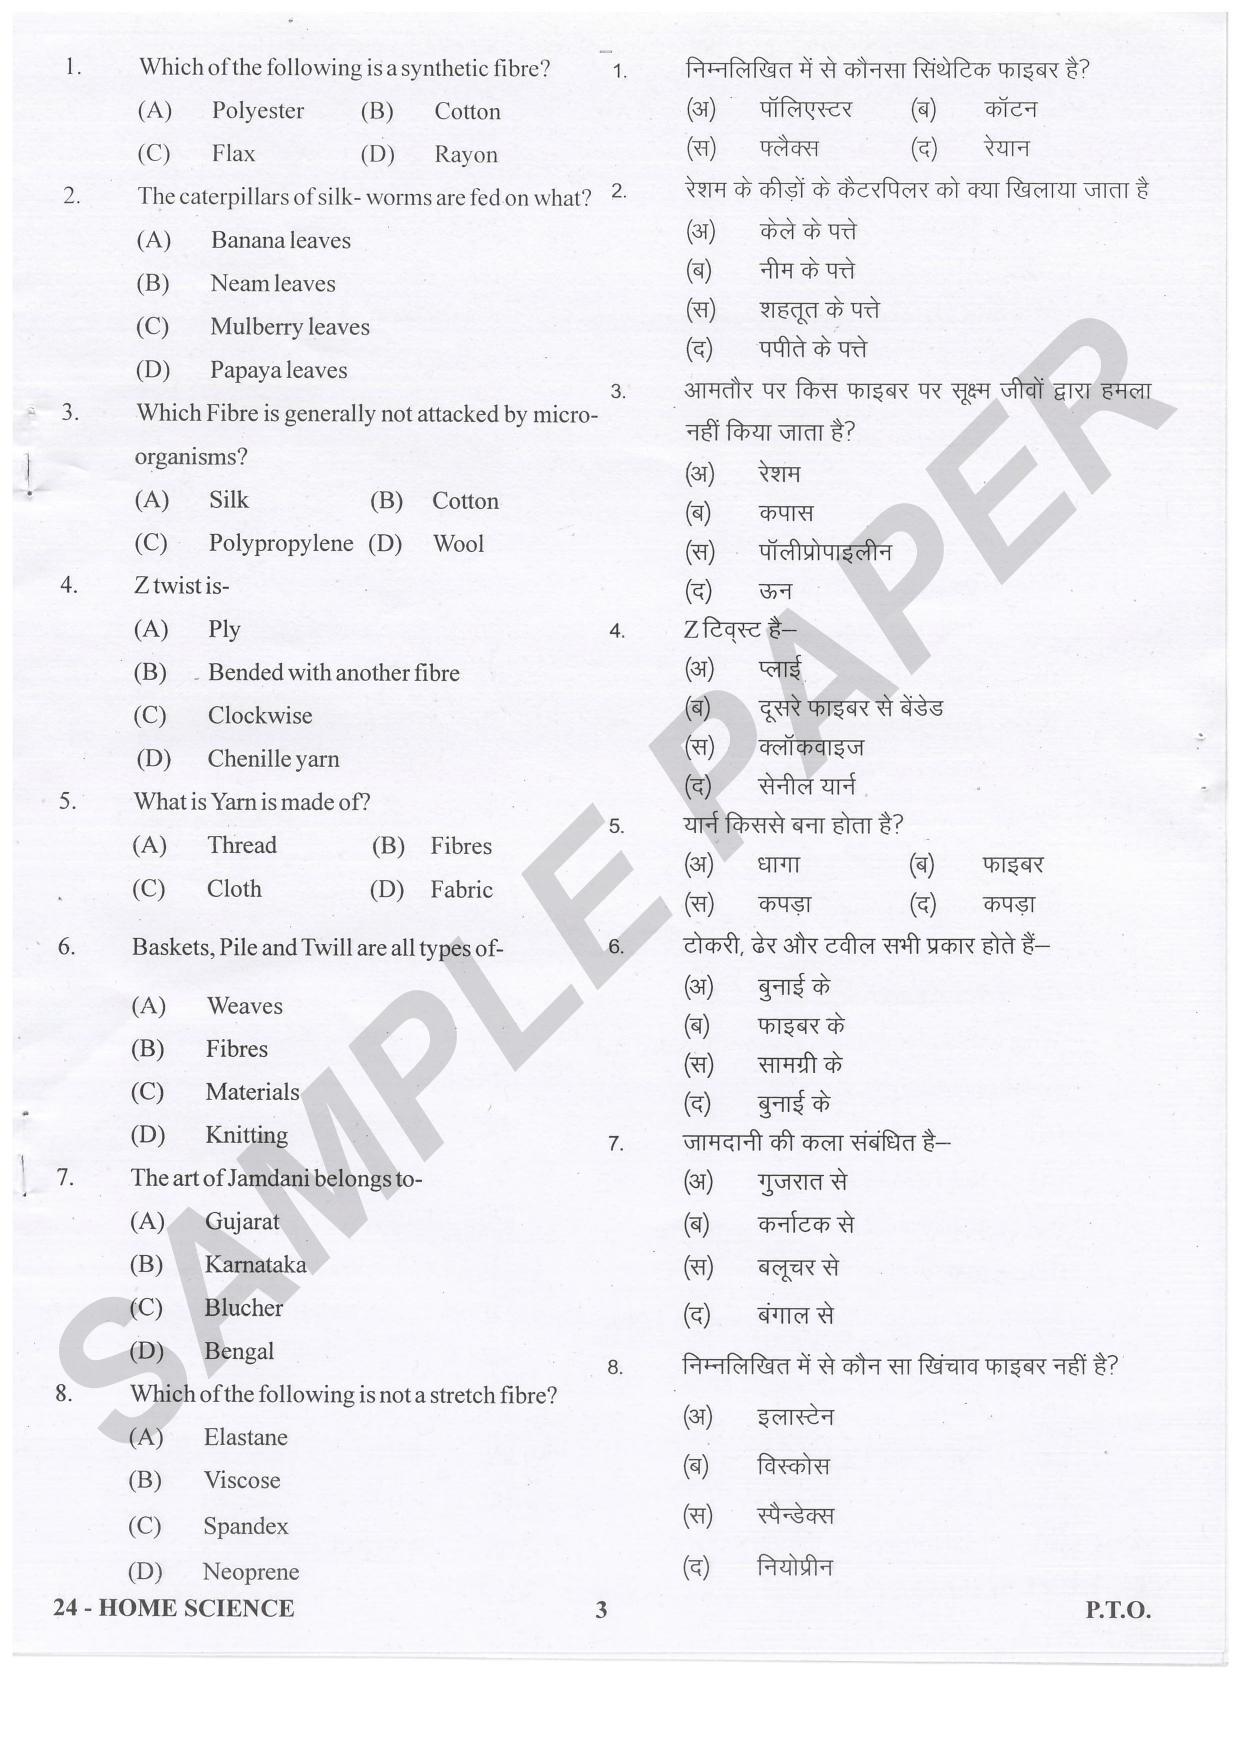 URATPG Home Science Sample Question Paper 2021 - Page 3